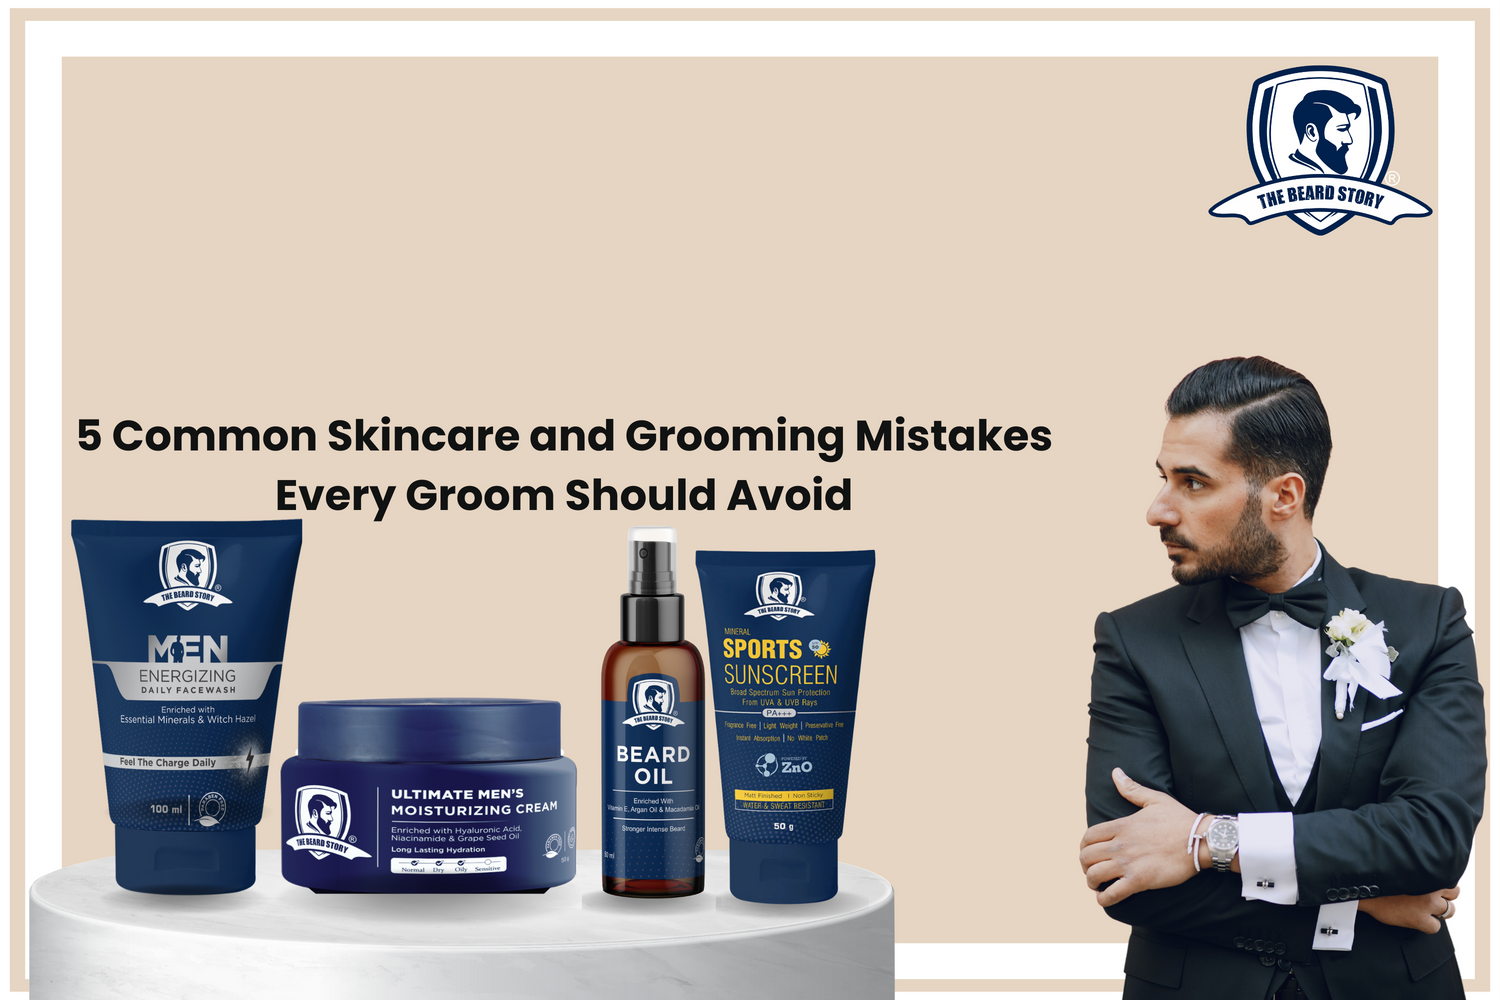 5 Common Skincare and Grooming Mistakes Every Groom Should Avoid